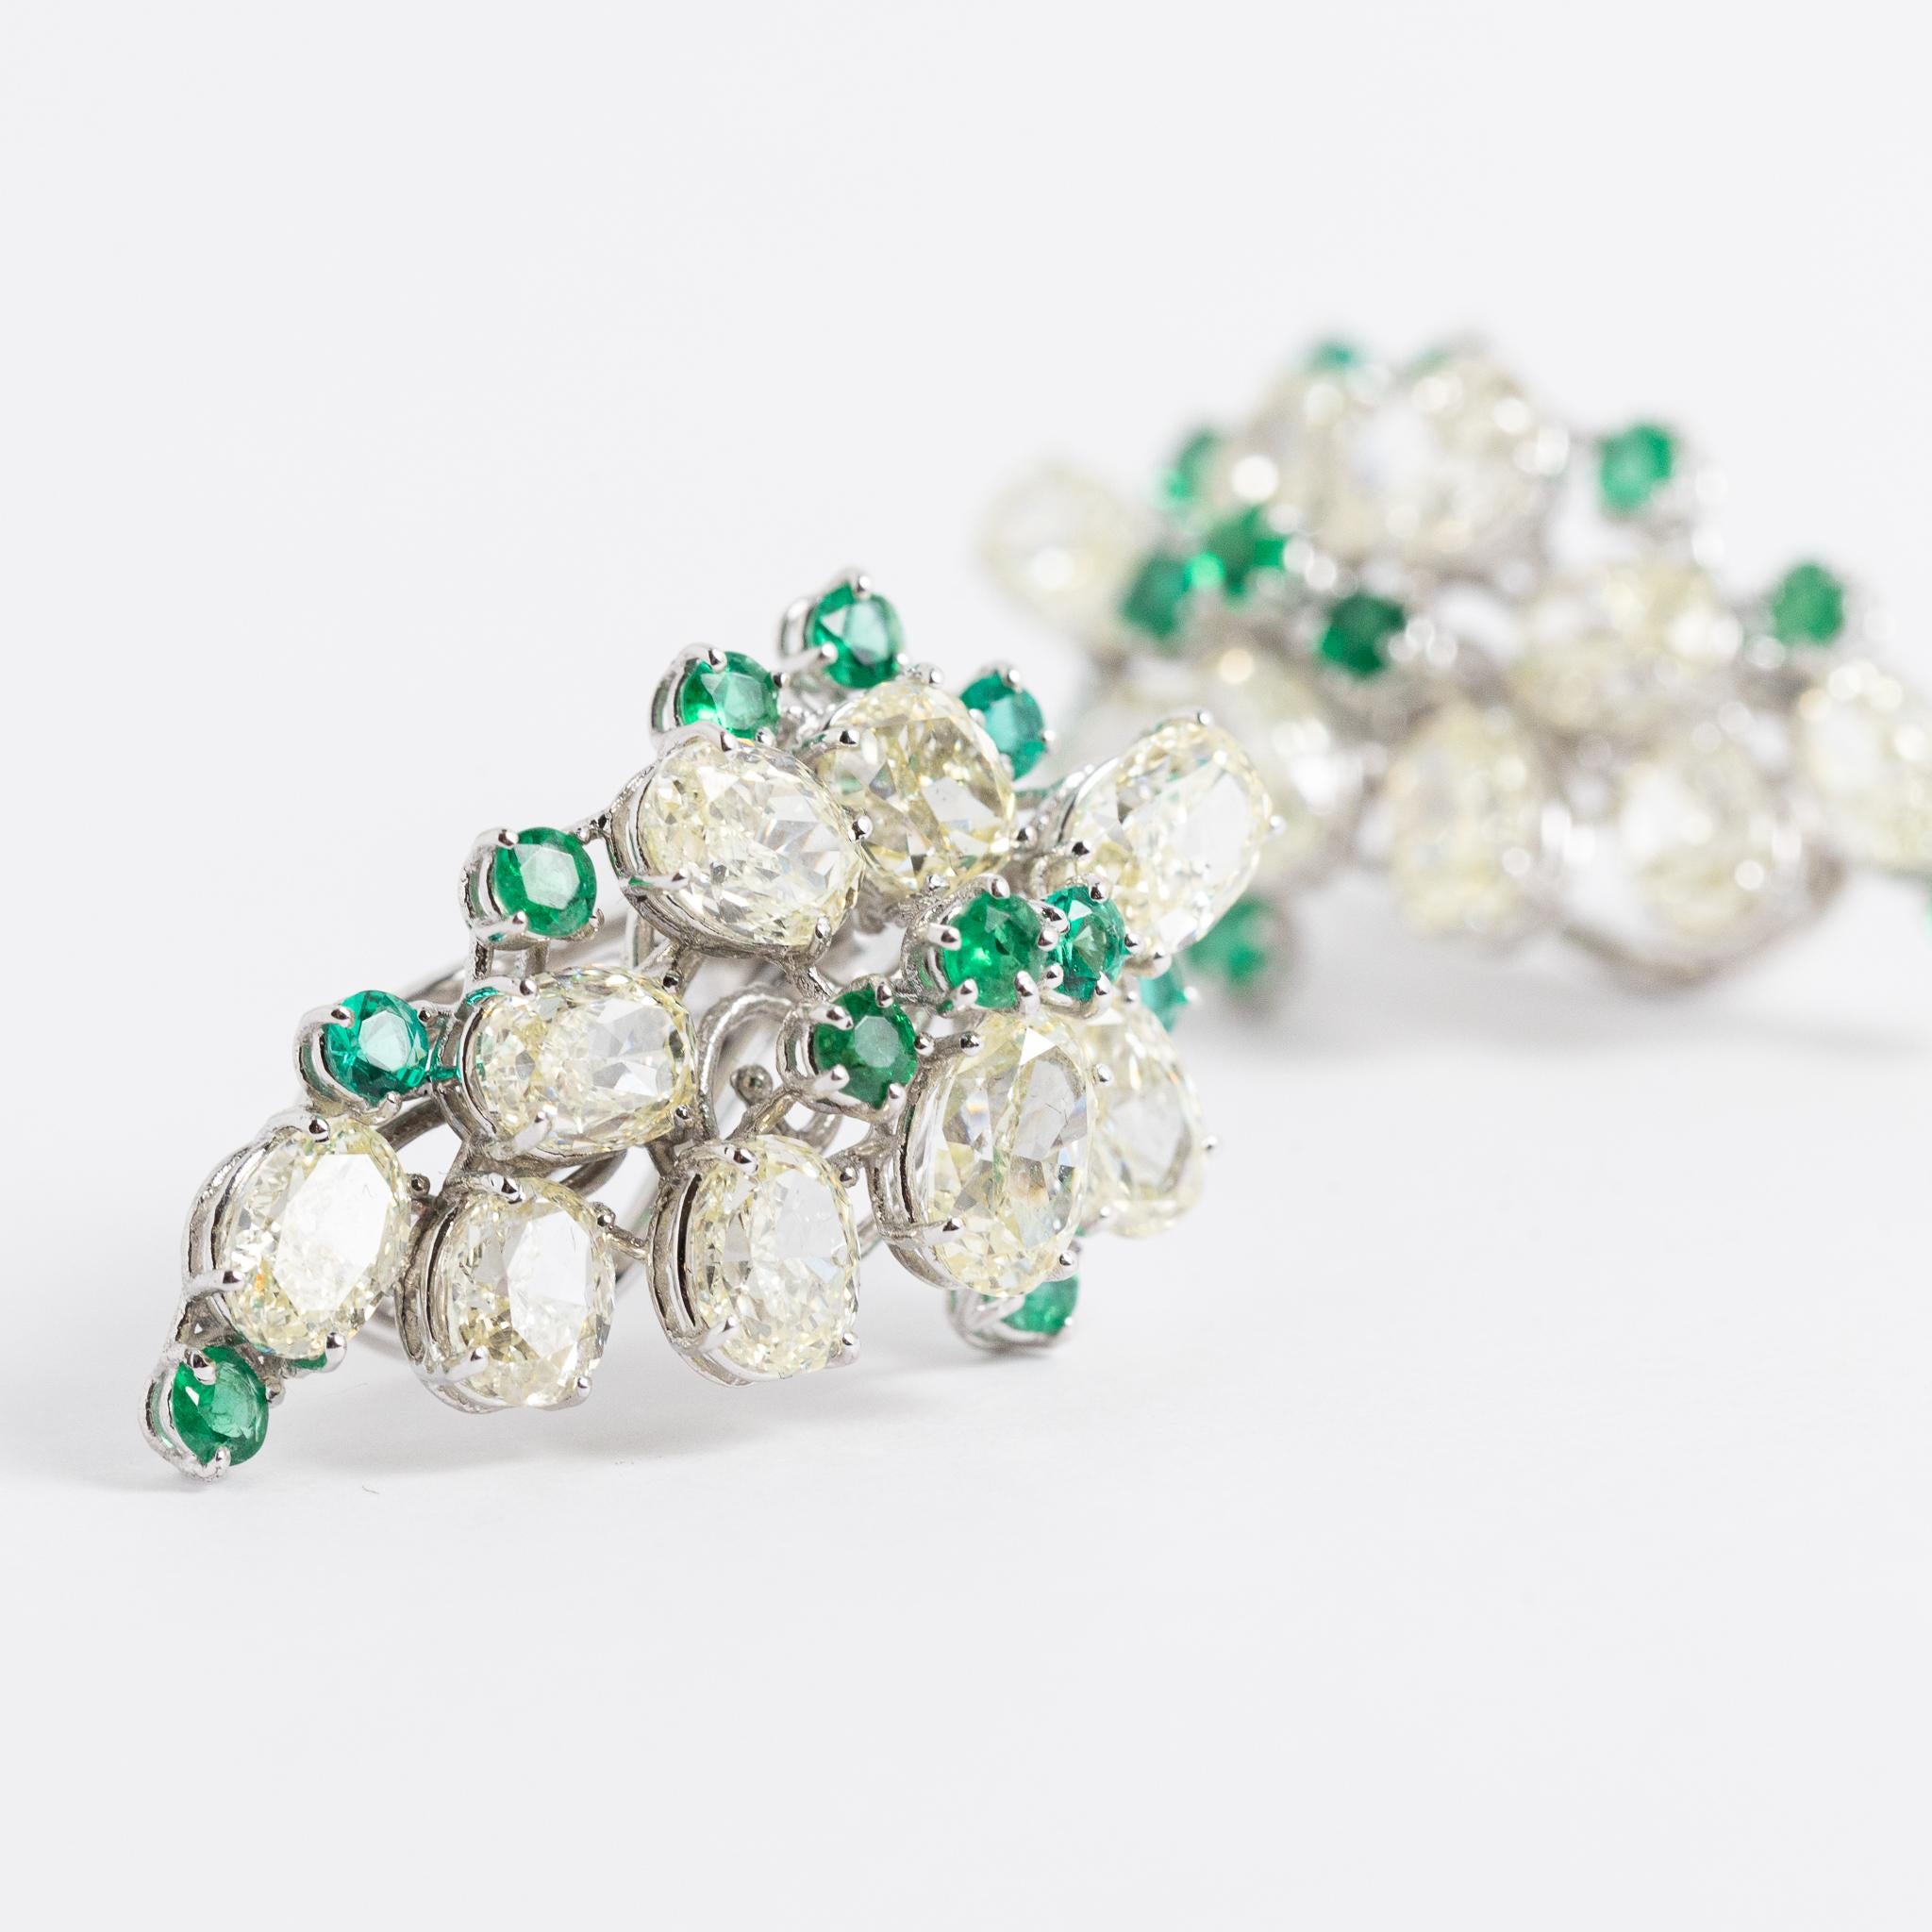 Handmade in Italy 18 kt. white gold earrings with oval-cut diamonds and brilliant-cut emeralds. 
This piece belongs to Fraleoni's Dolcevita collection.
The classic design is enhanced by the contrasting colors created by diamonds and emeralds.
One of